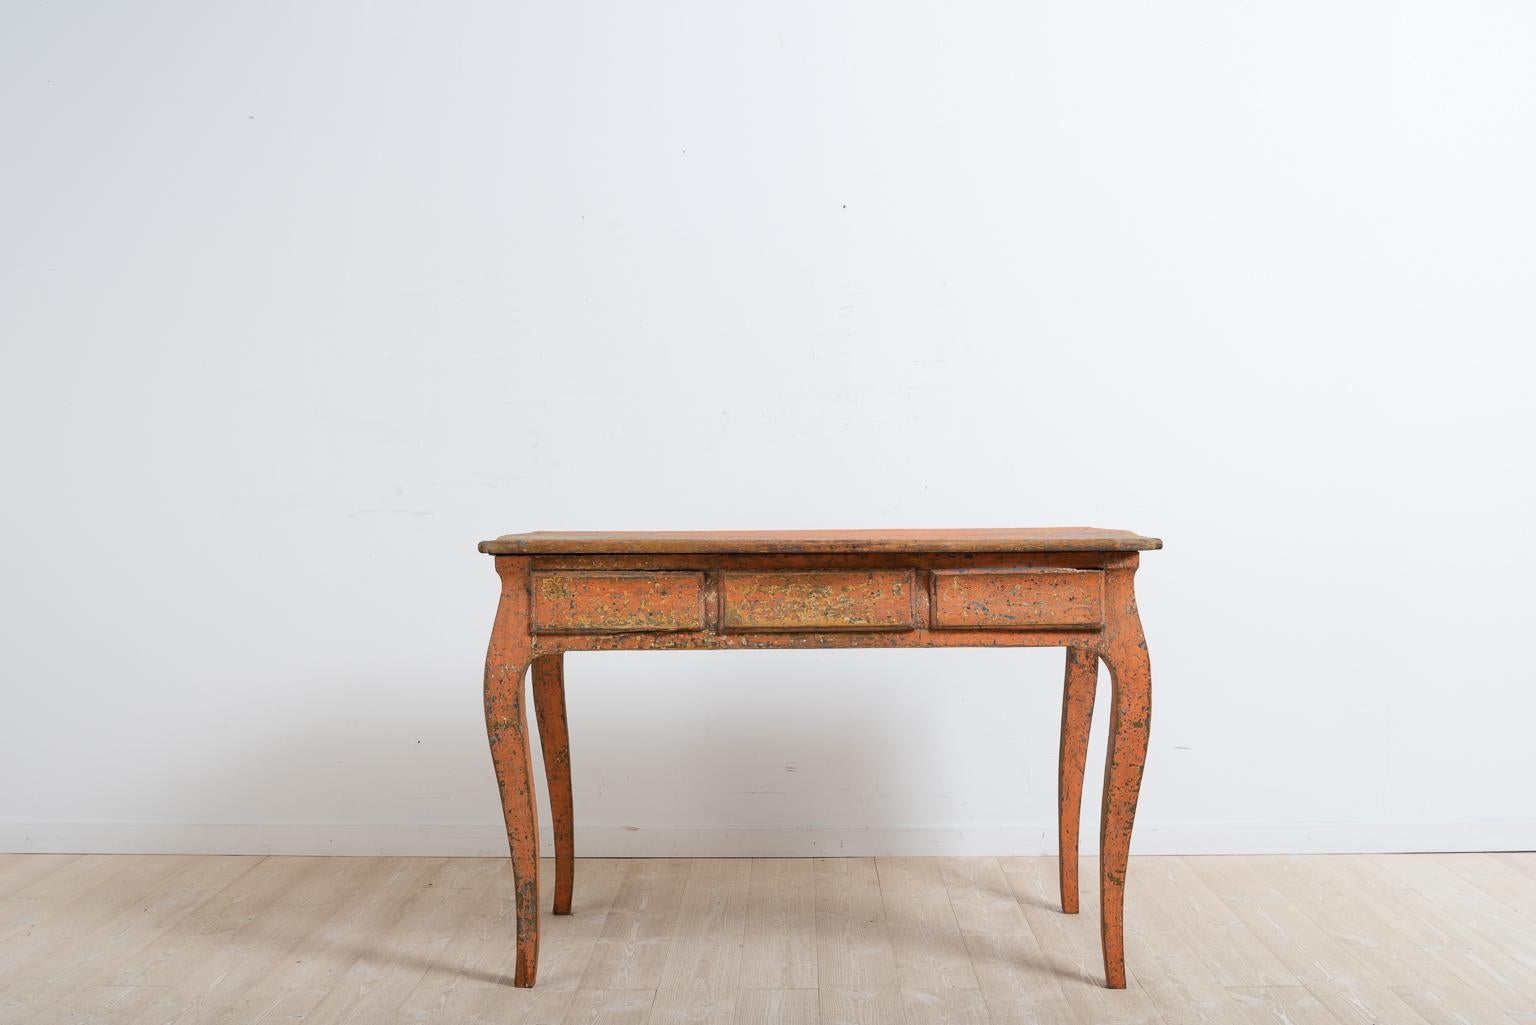 Late 18th century Rococo desk from northern Sweden. The desk has a profiled tabletop with curved rims. Dry scraped to the original first layer of paint. The drawers have signatures from previous generations and owners underneath. The desk is